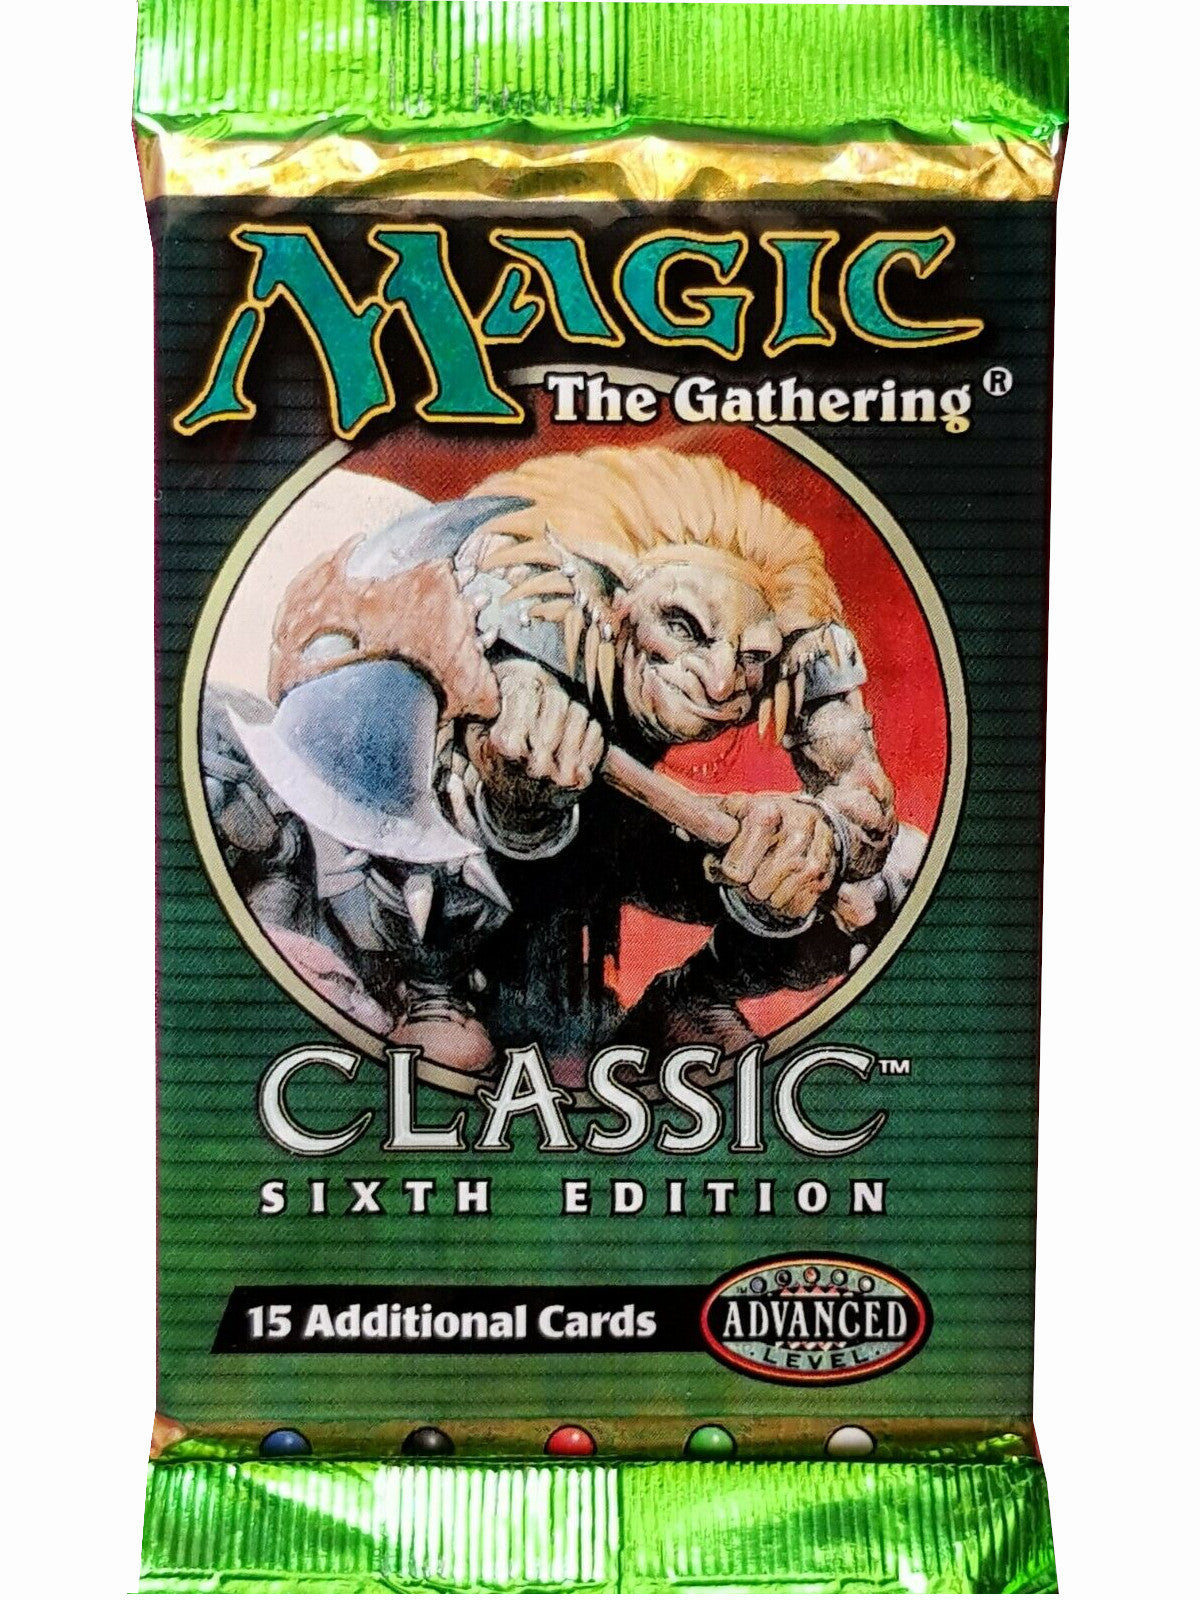 Classic Sixth Edition - Booster Pack | Devastation Store